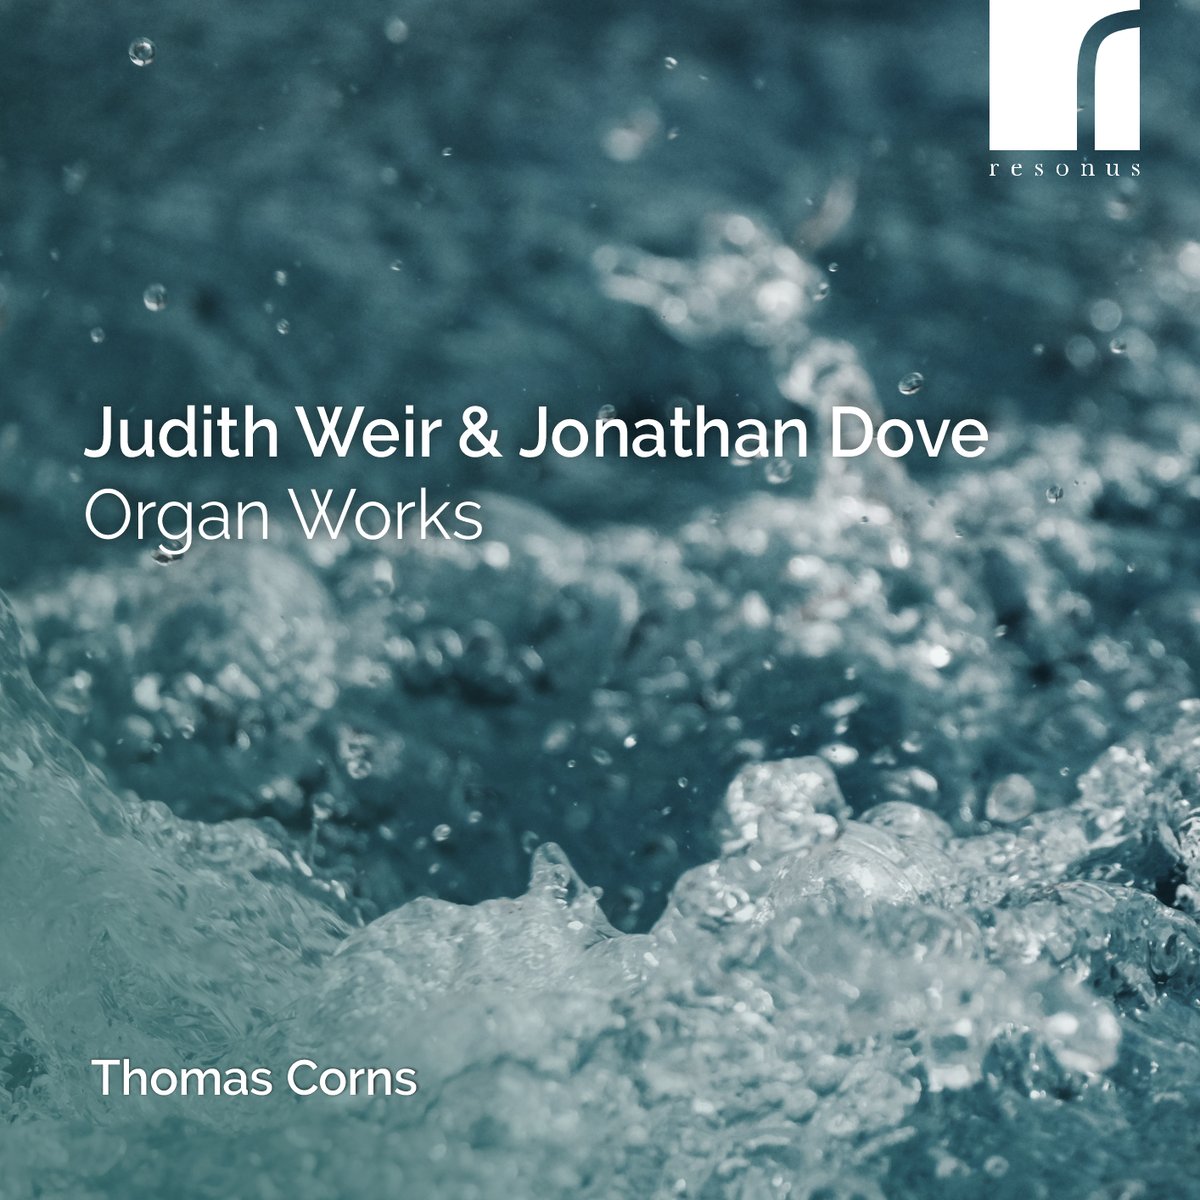 New single released! Ahead of the composer's birthday (happy birthday Judith!), here's a single of Judith Weir's 'Ettrick Banks' from the album of organ works by Weir & Jonathan Dove by Thomas Corns. Listen now on @Spotify or wherever you get your music👉orcd.co/xqe42d5